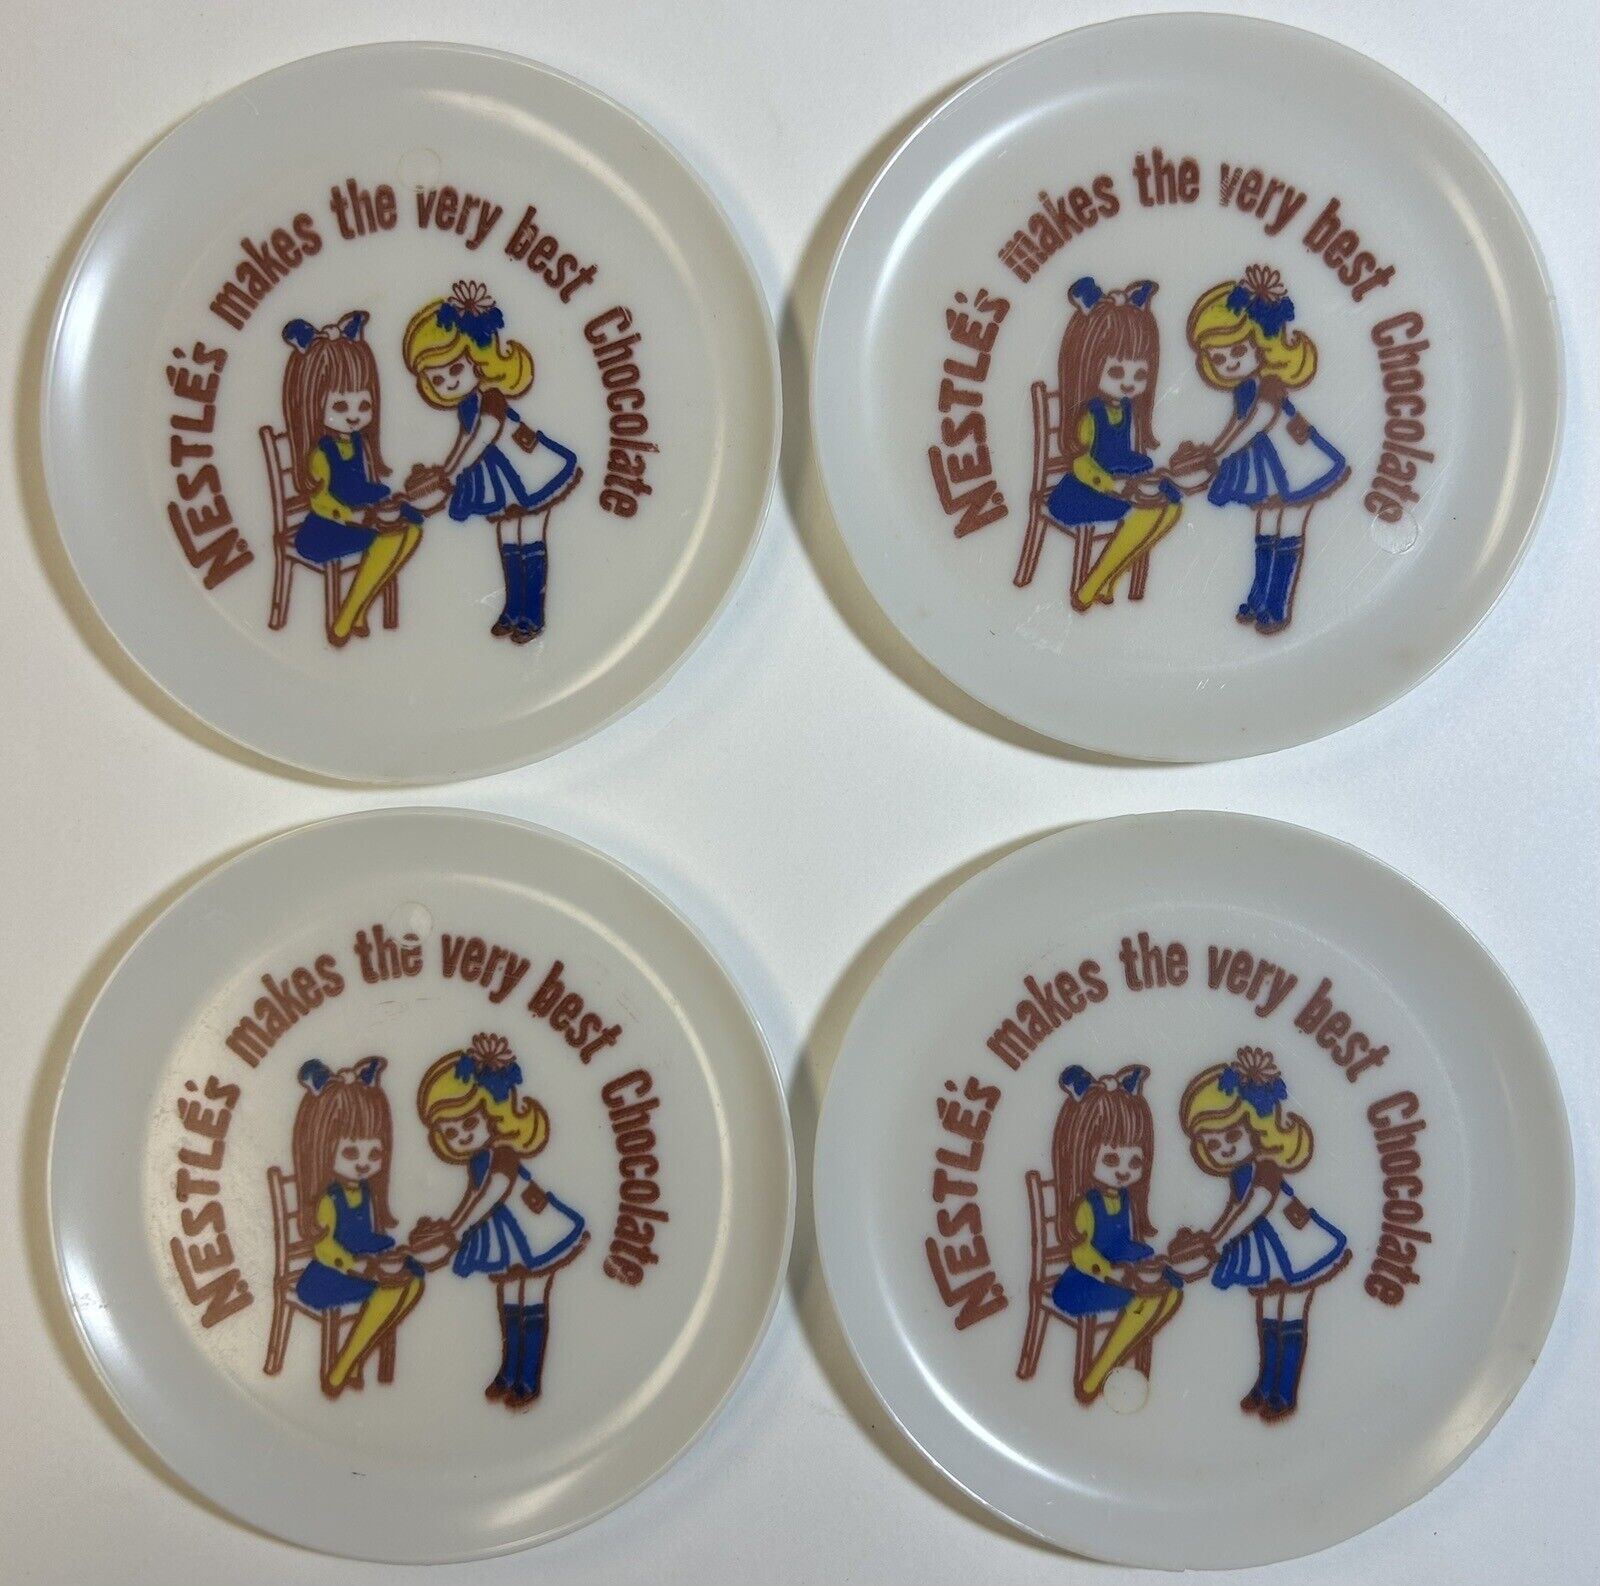 Nestle’s Makes the Very Best Chocolate 4 3/8” Plastic Plate Set, 4 Plates